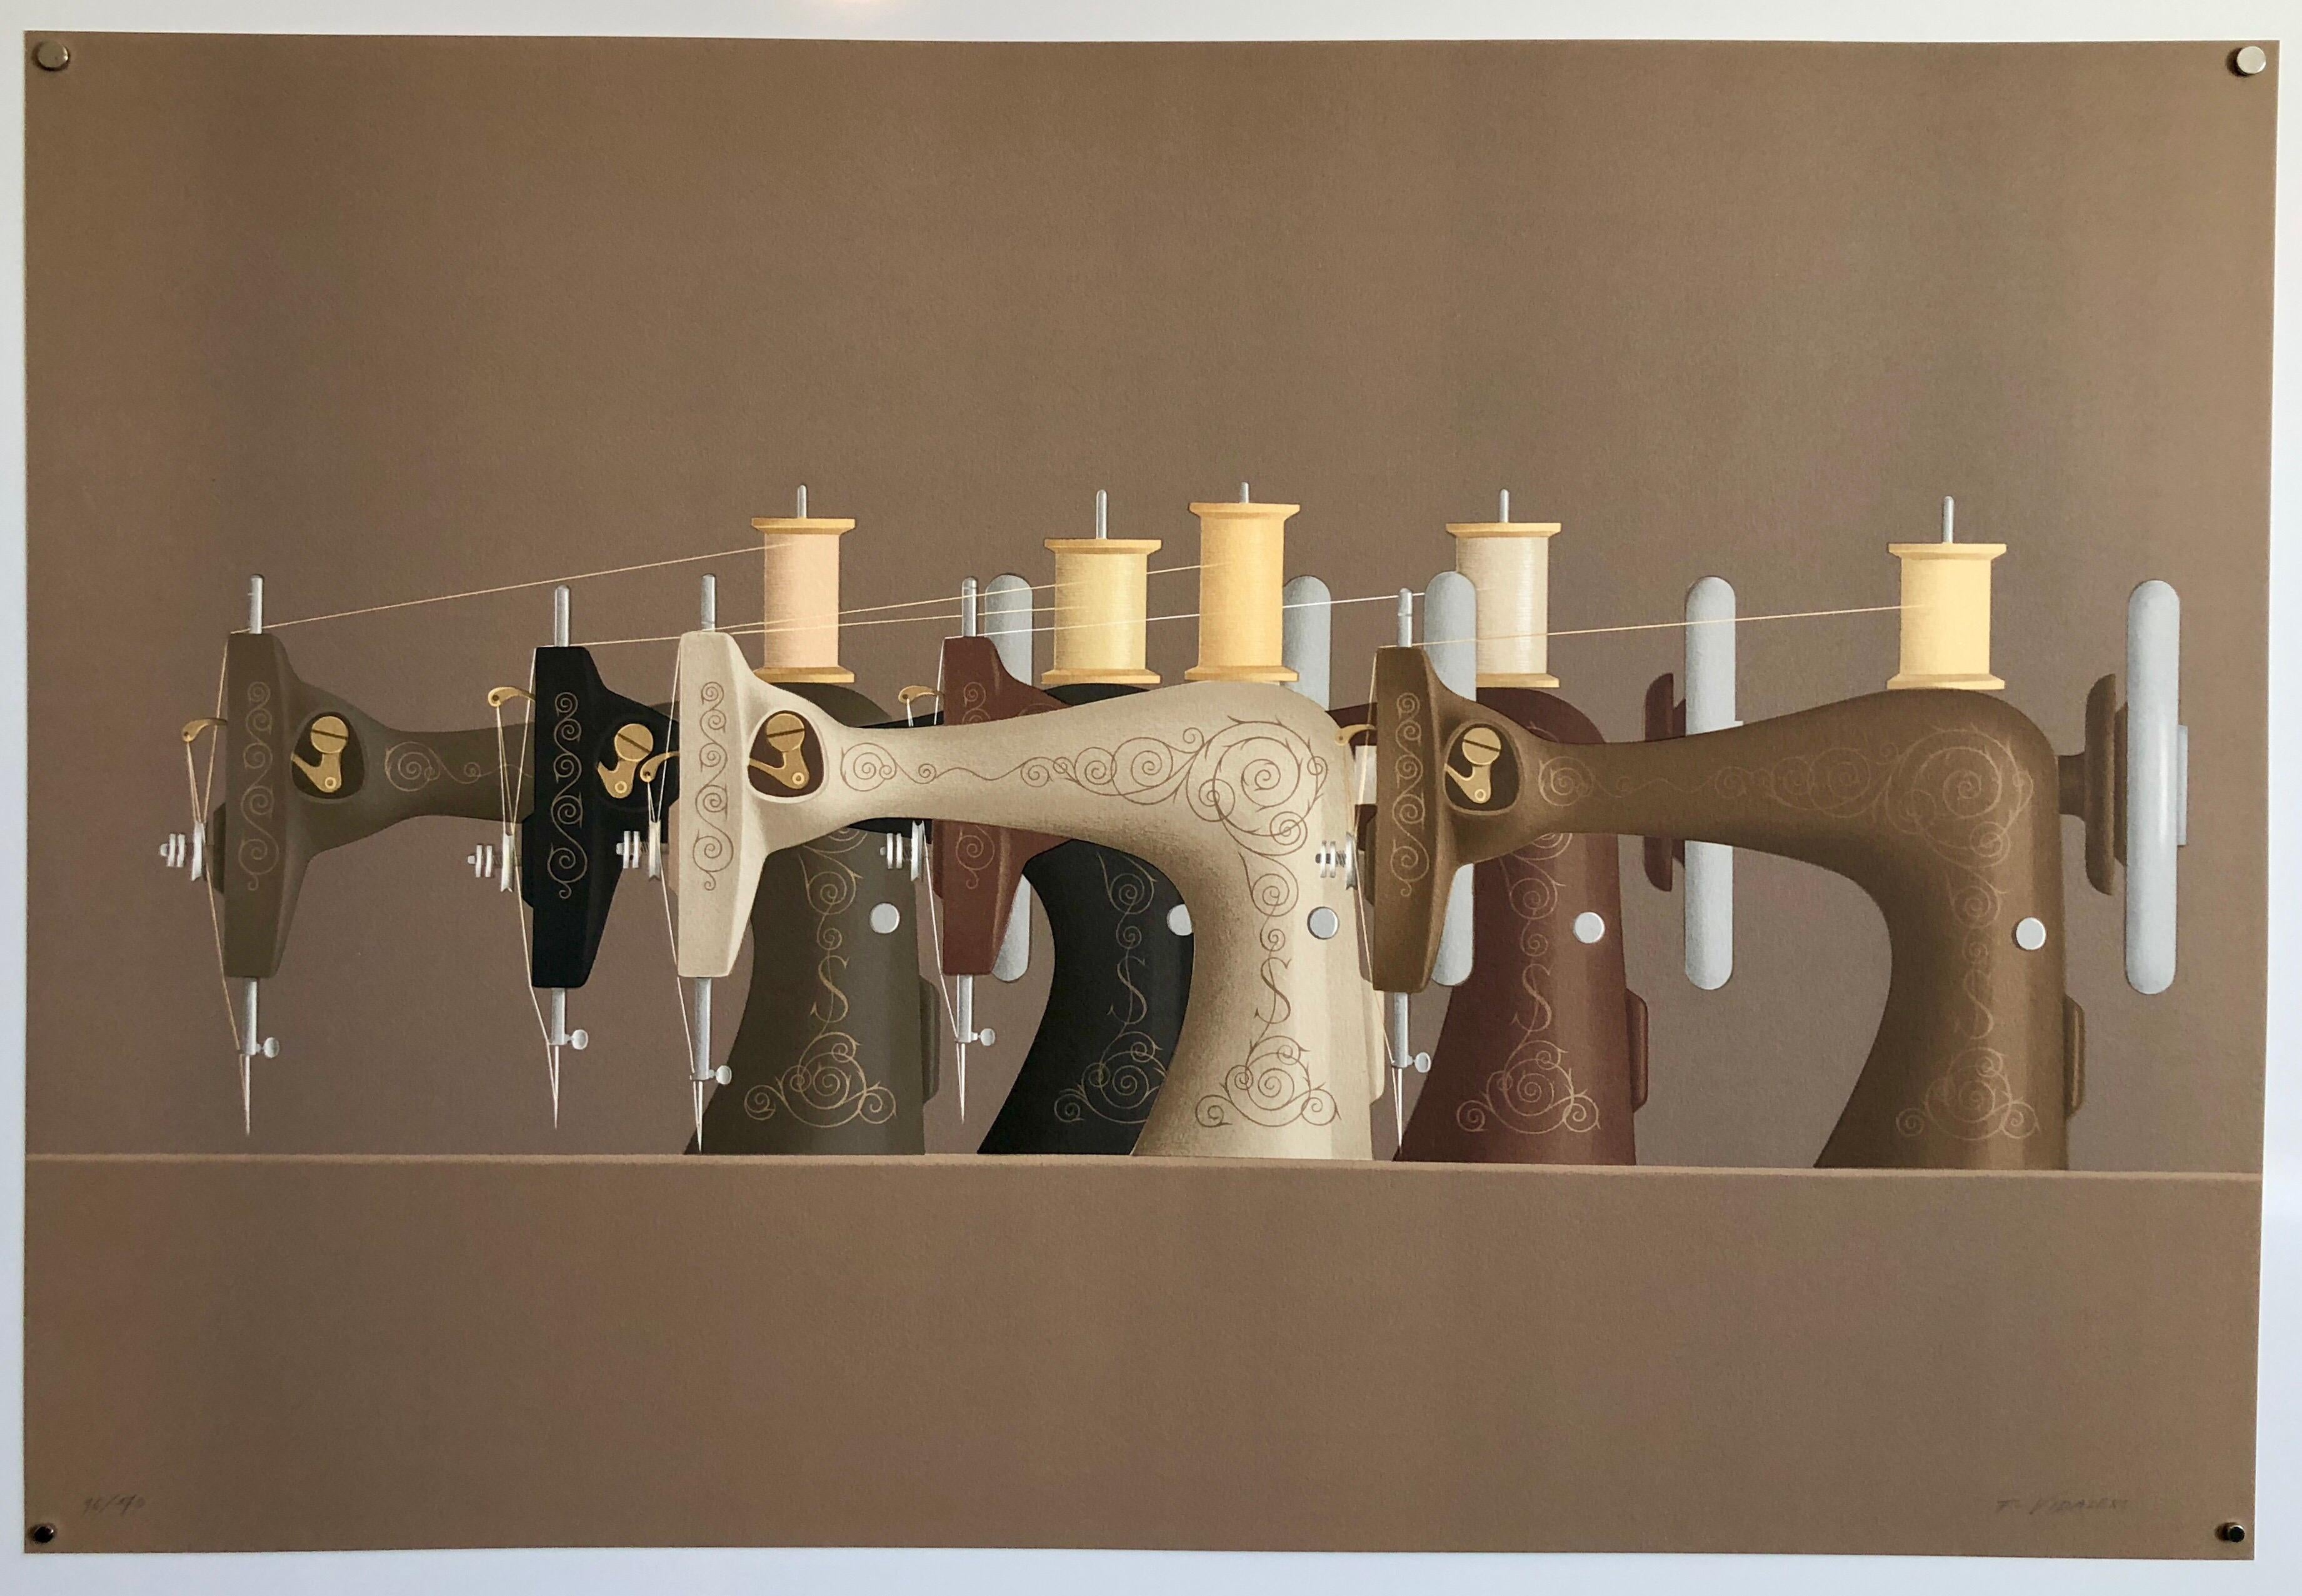 French Surrealist Trompe L'oeil Still Life Lithograph of Sewing Machines 1